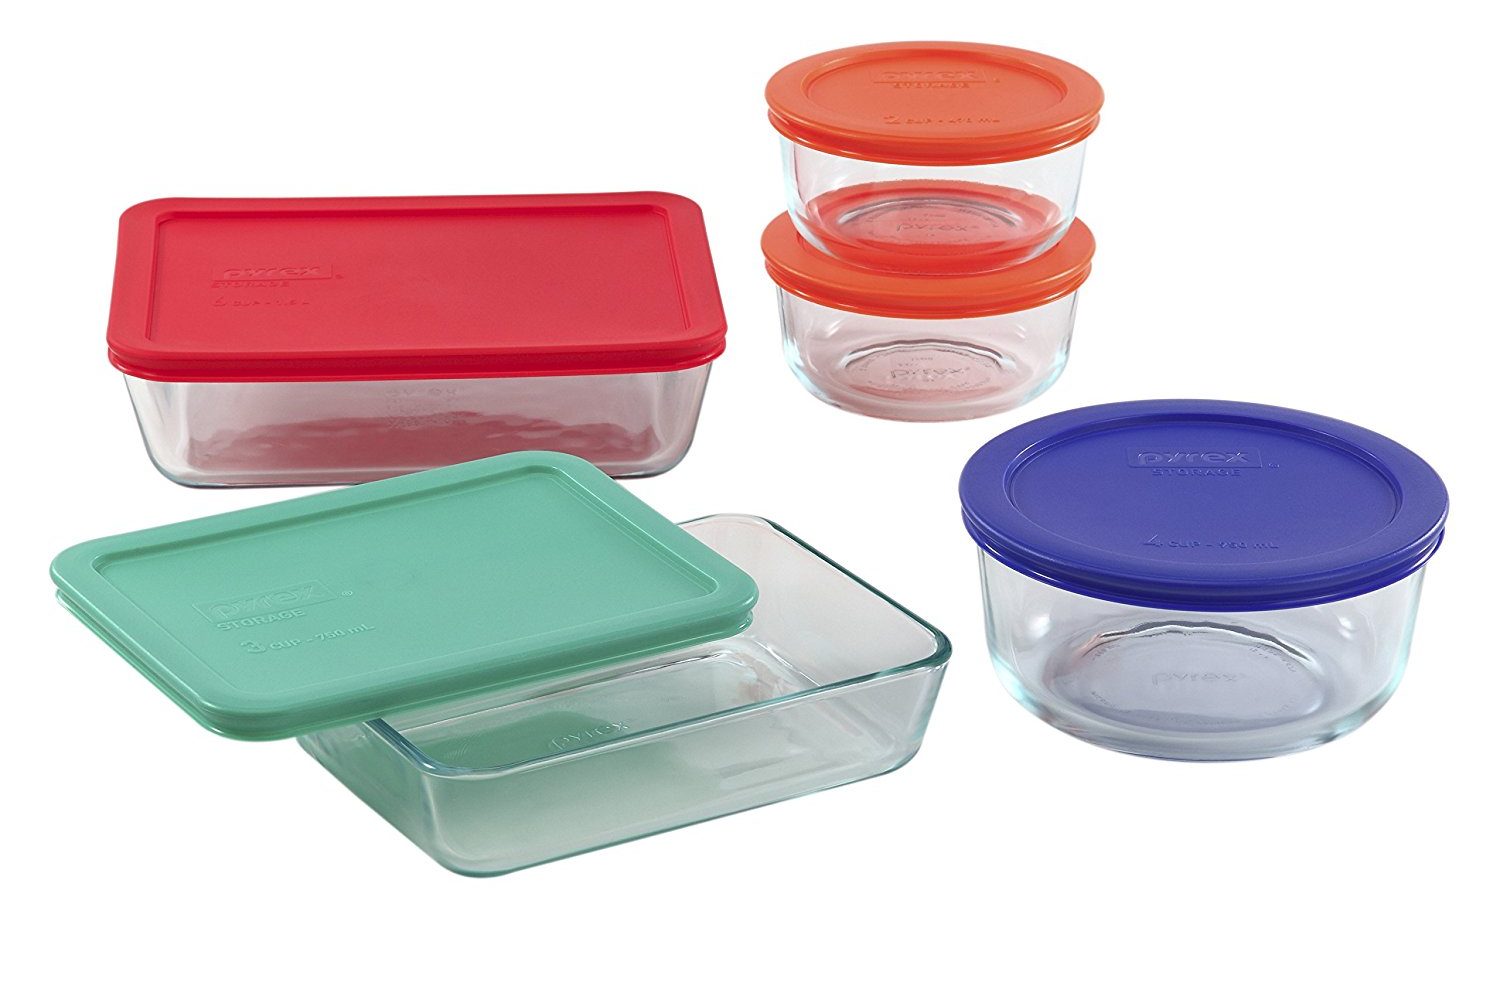 Pyrex Simply Store Glass Food Container Set with Multi-Colored Lids (10-Piece)—$14.88!